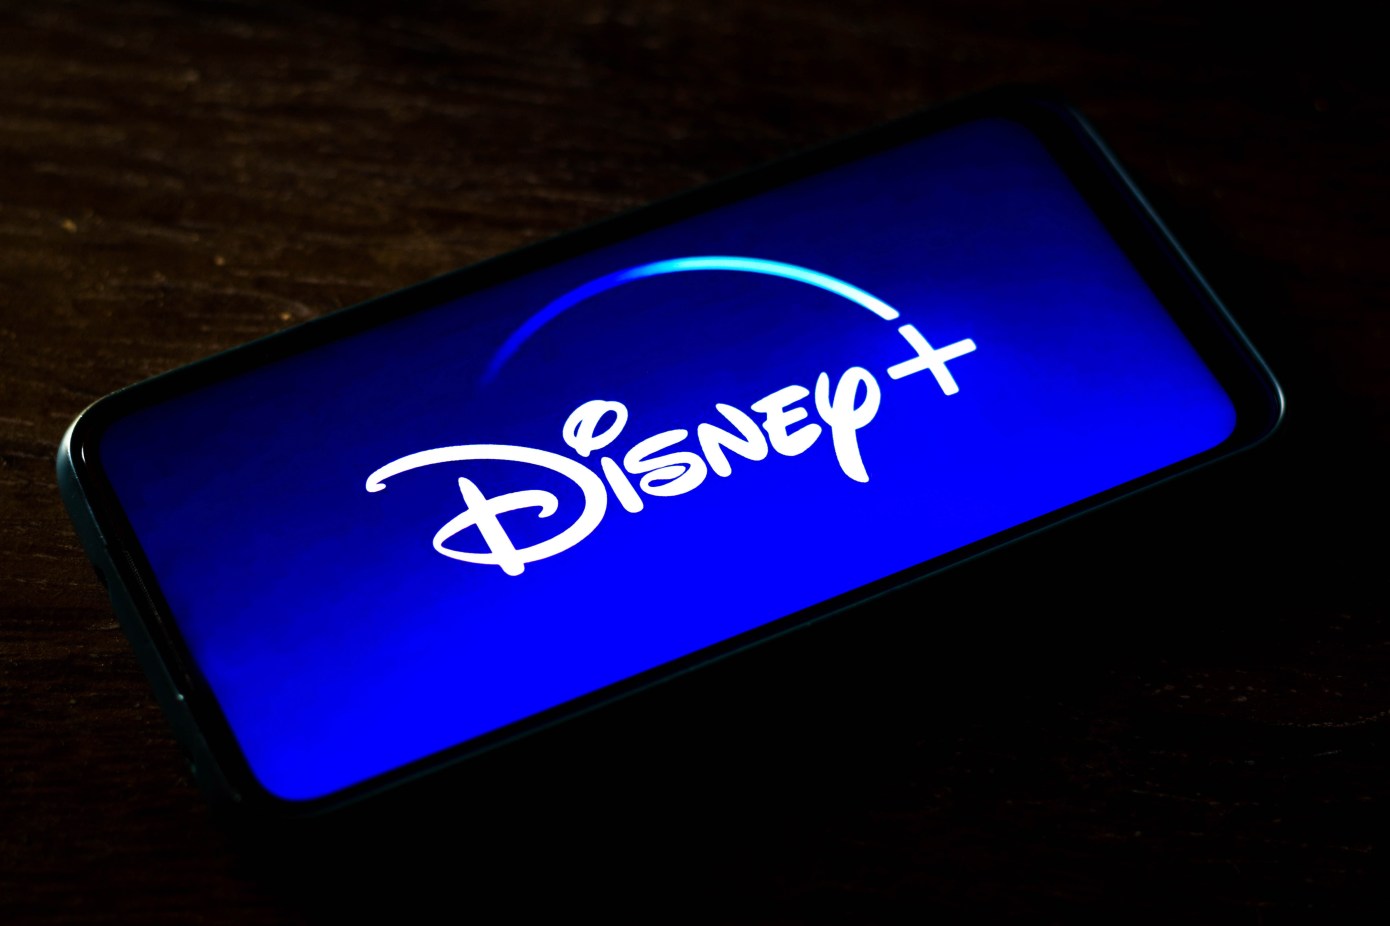 Disney+ launches its ad-supported tier